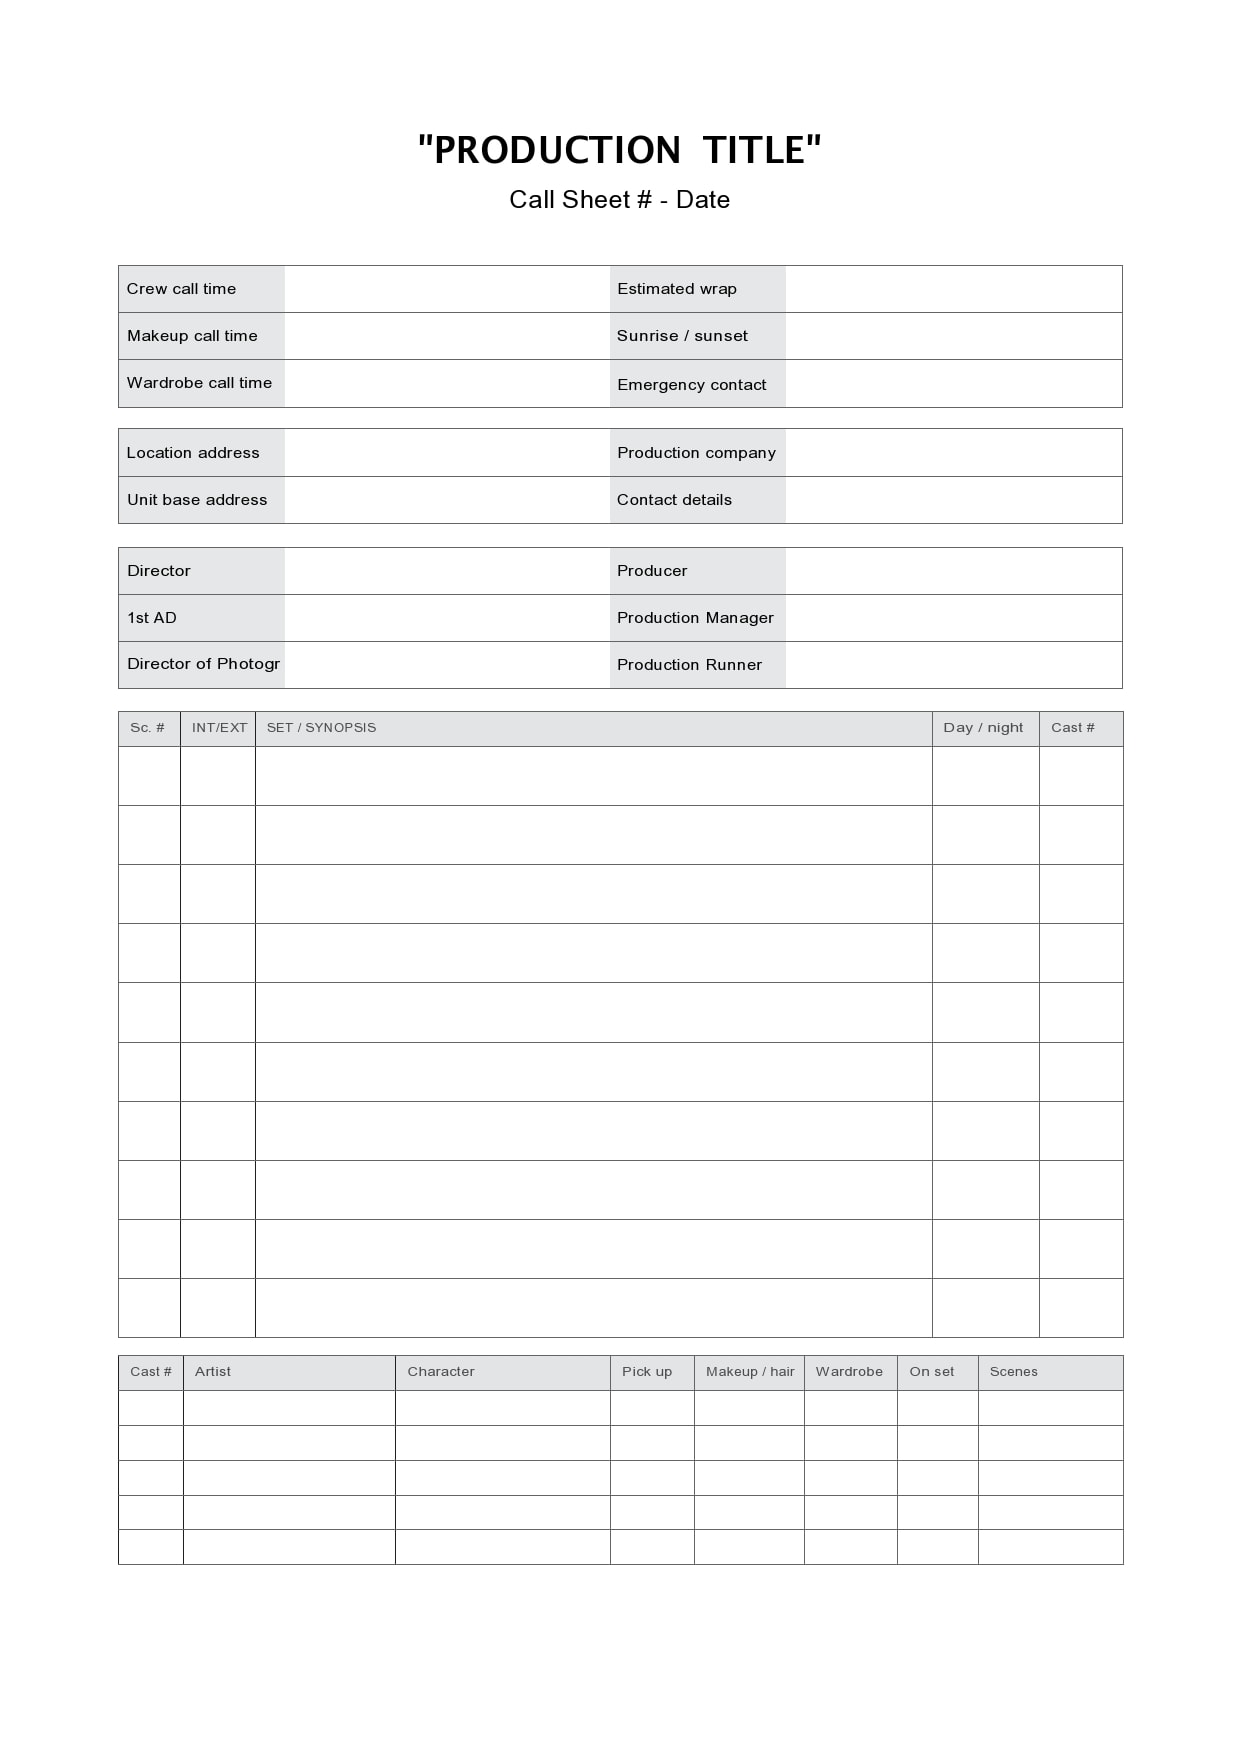 39 Simple Call Sheet Templates Free